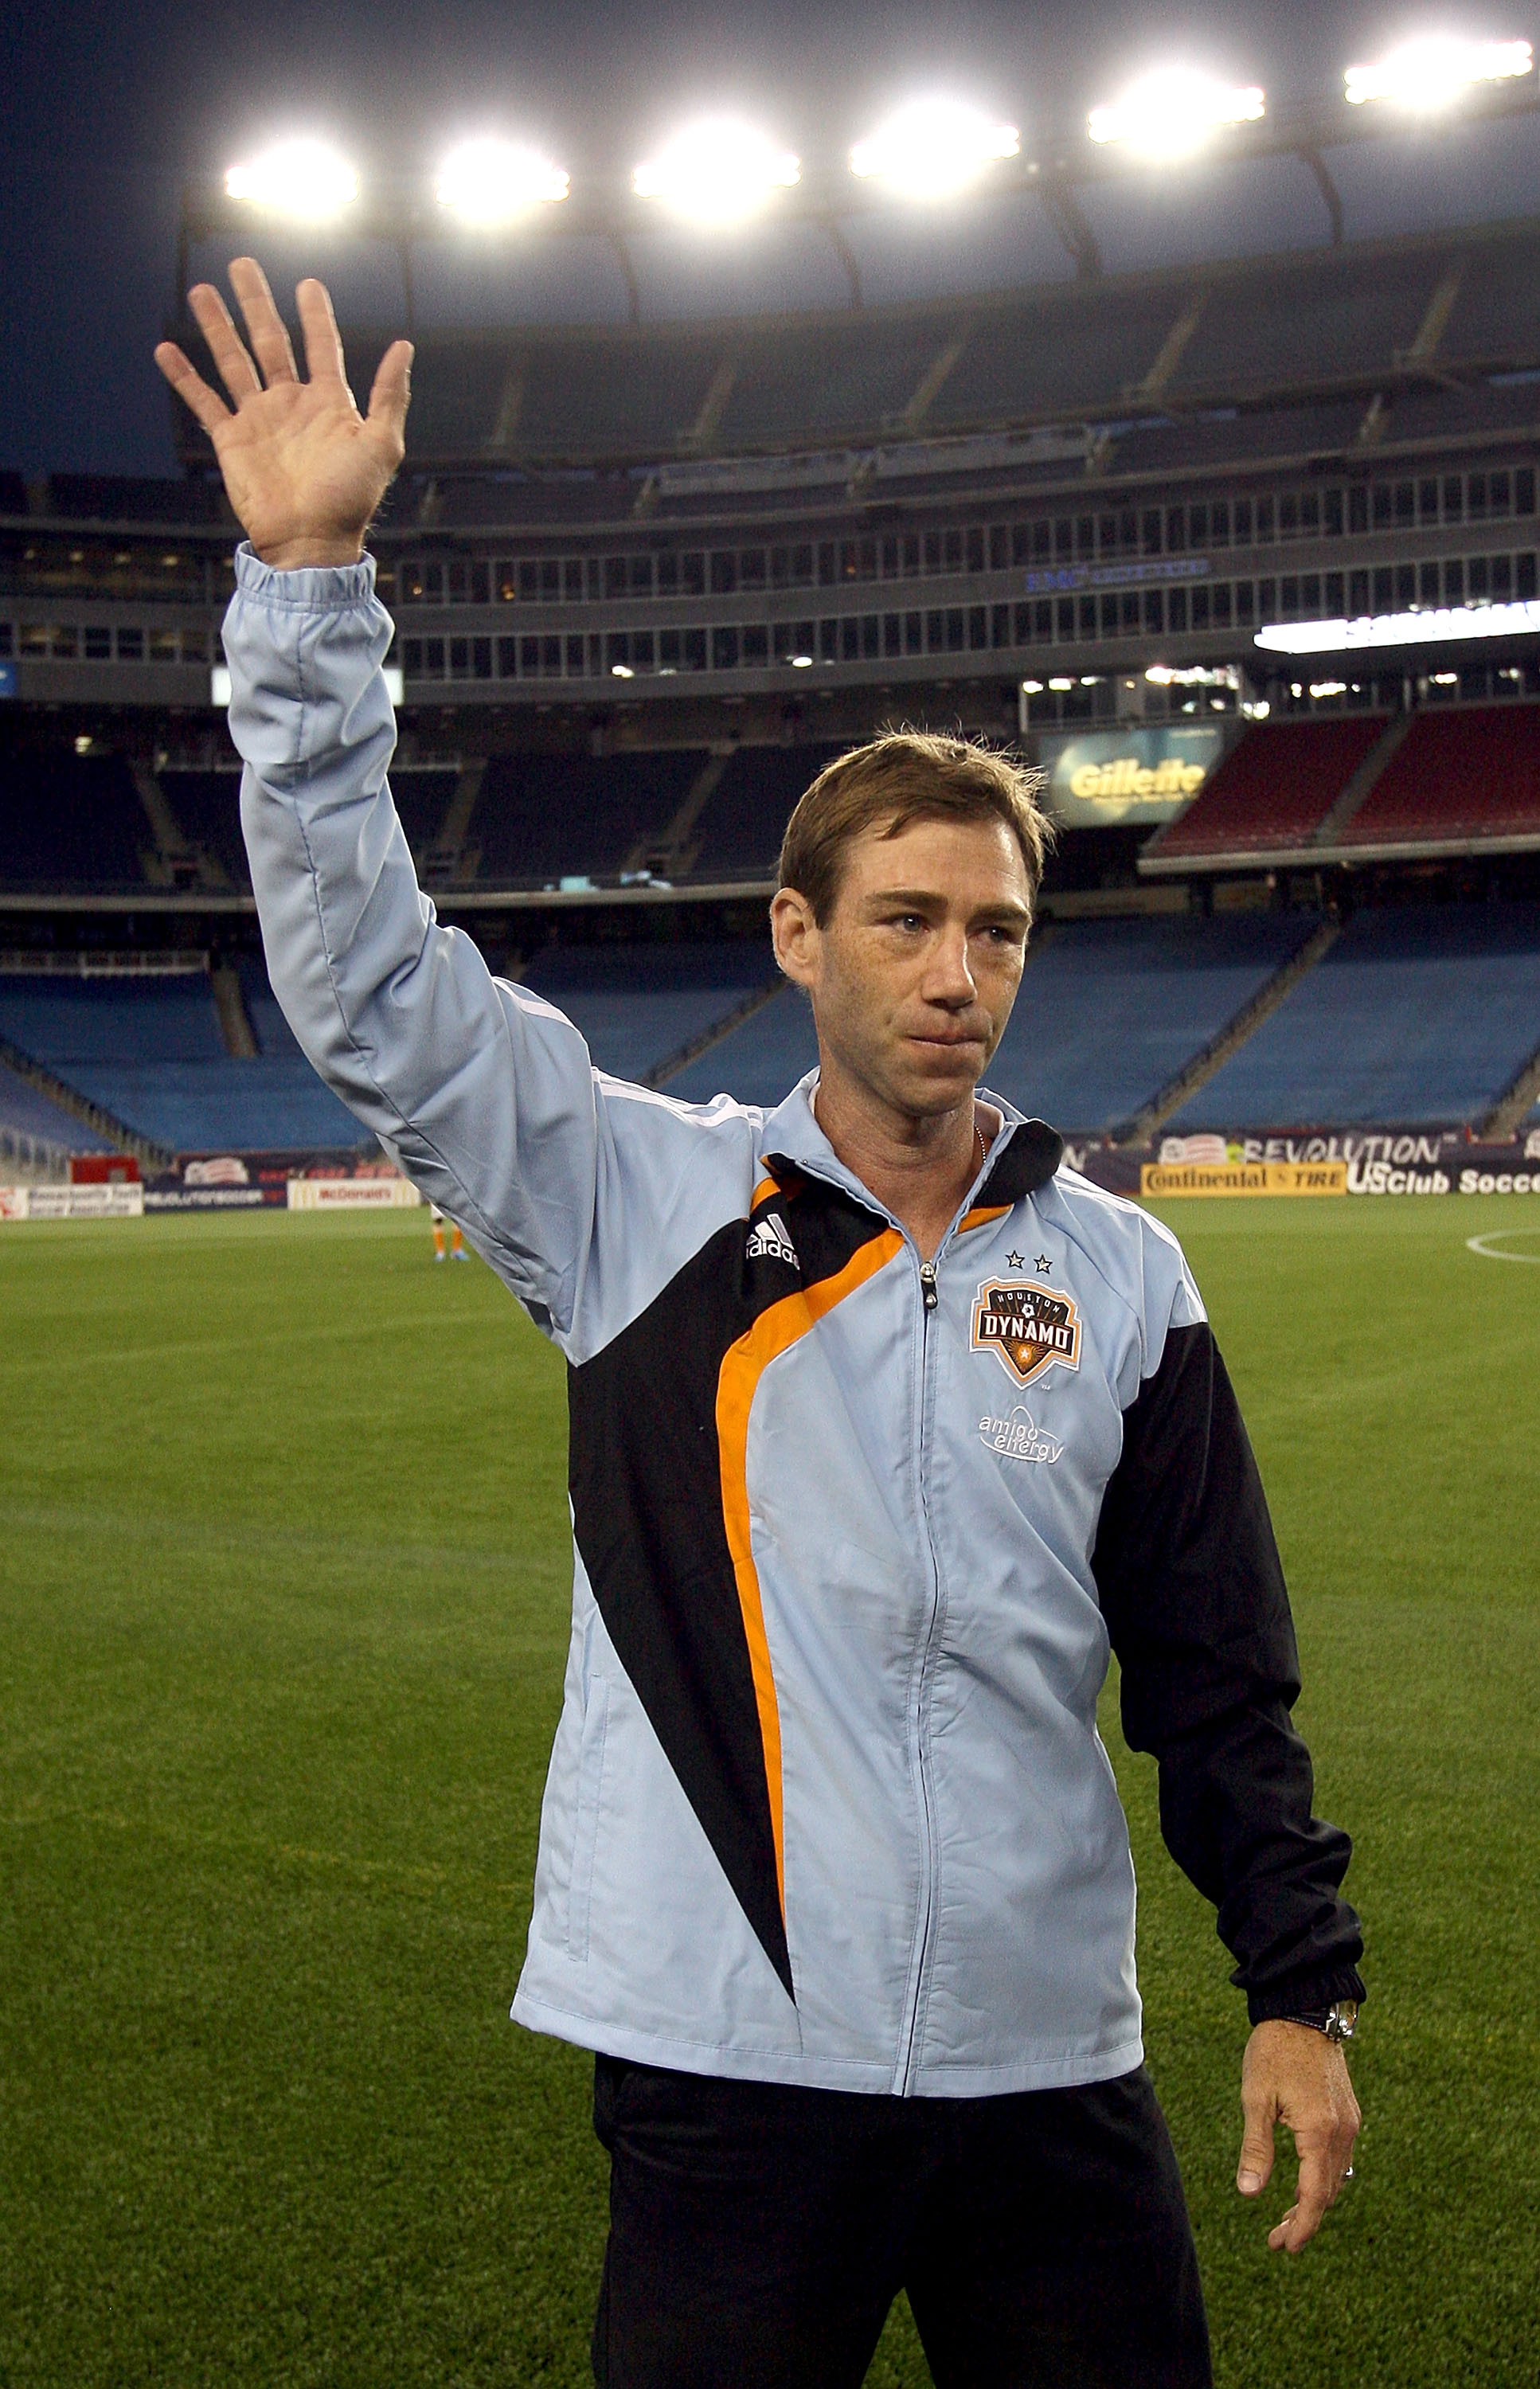 FOXBORO, MA - AUGUST 14: Steve Ralston, a former member of the New England Revolution, reacts to the applause of the fans before a game with Houston Dynamo, the team with which he is now a coach, at Gillette Stadium on August 14, 2010 in Foxboro, Massachu